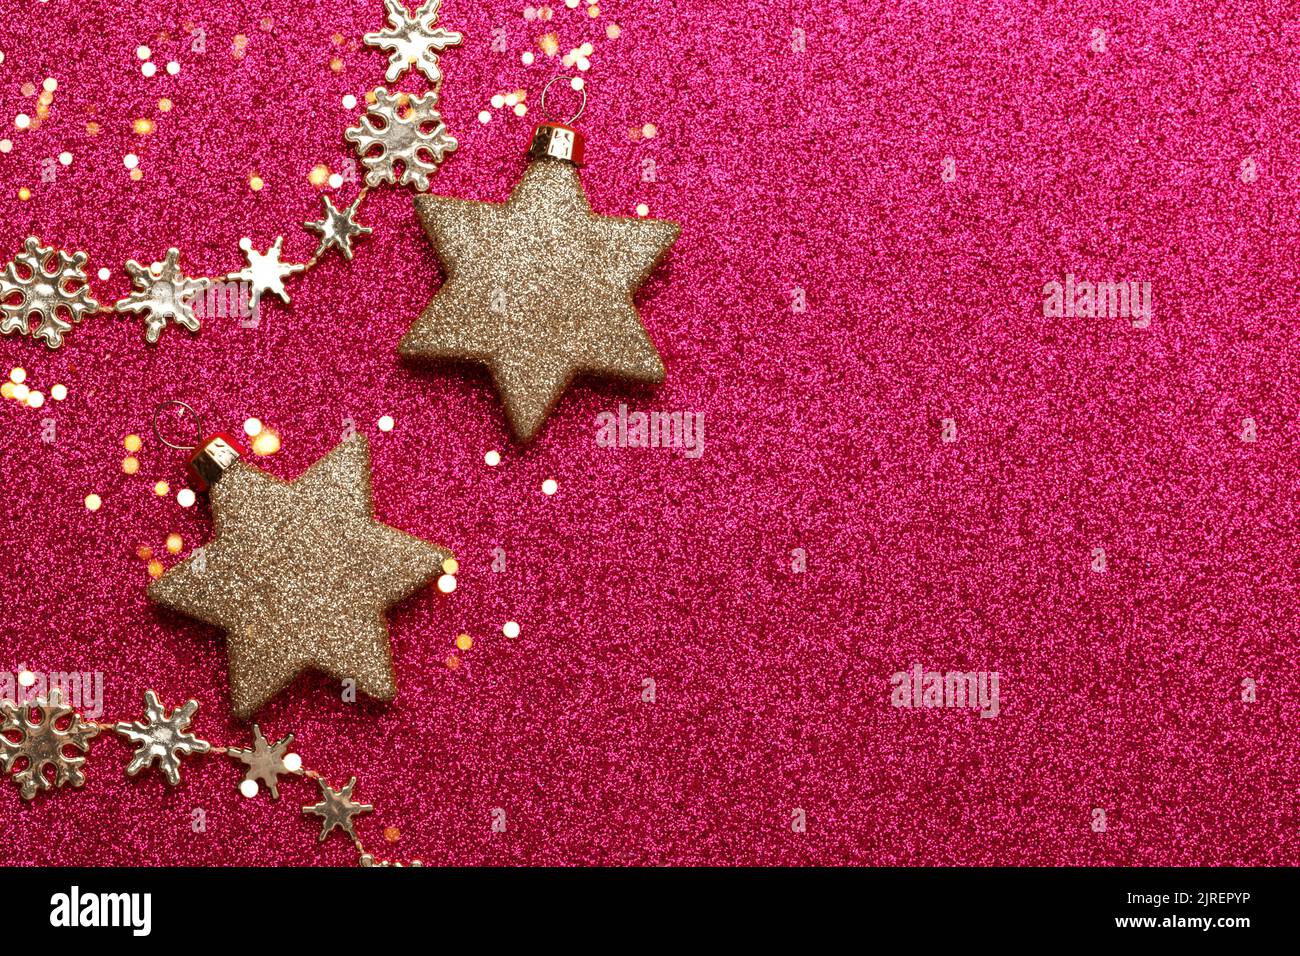 Christmas golden ornaments on the red glitter background with copy space top view Stock Photo